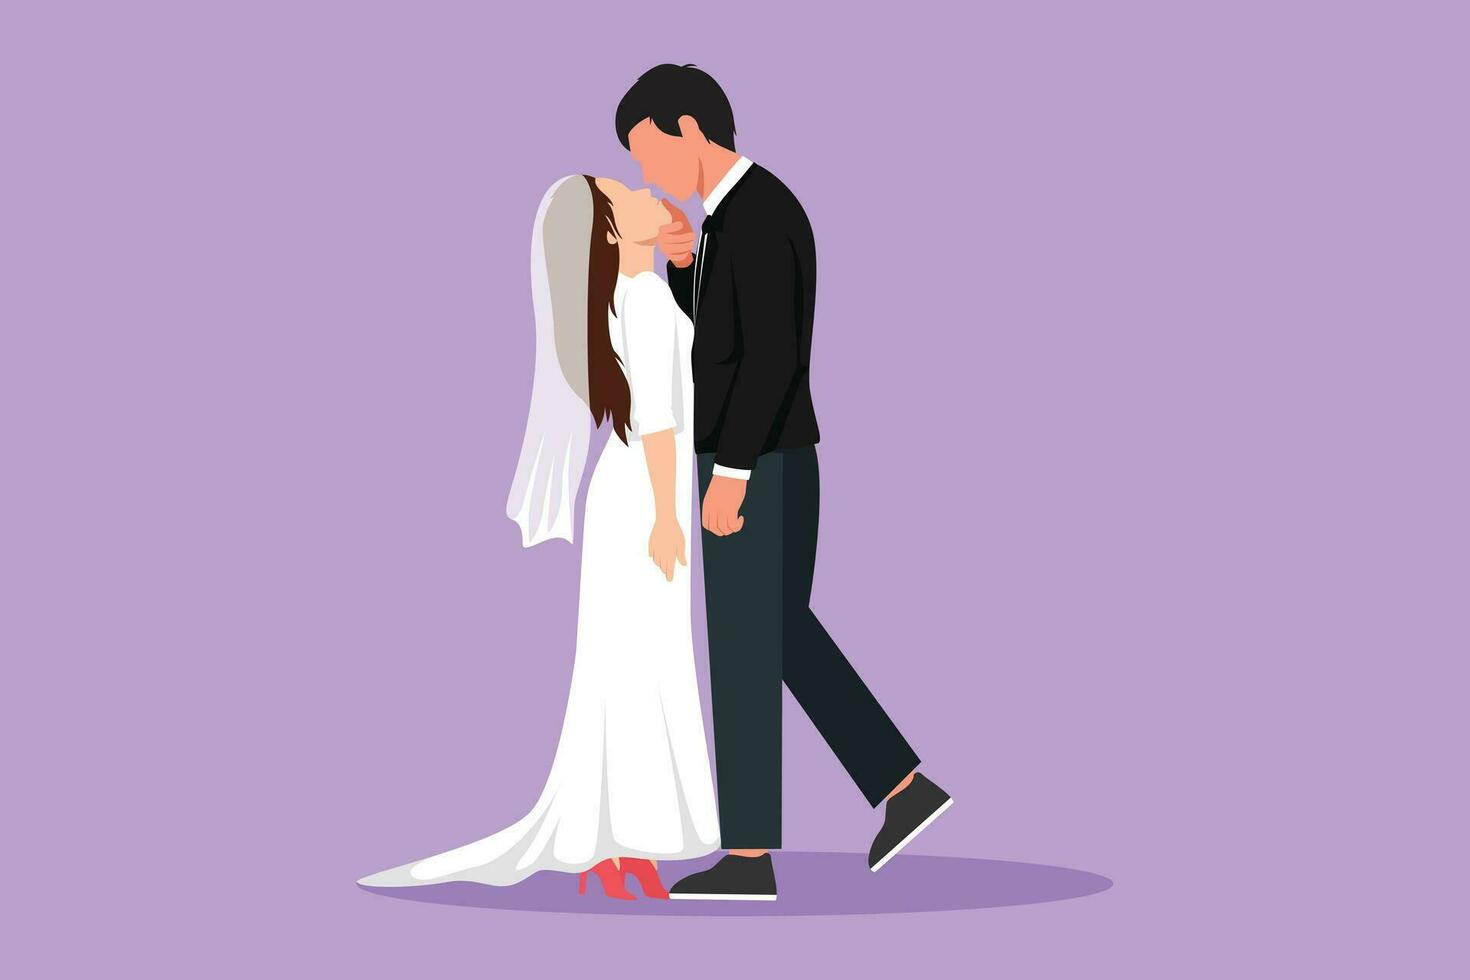 Cartoon flat style drawing dominant relationship of human. Married couple in love kissing and hugging. Happy handsome man and beautiful woman in wedding celebration. Graphic design vector illustration